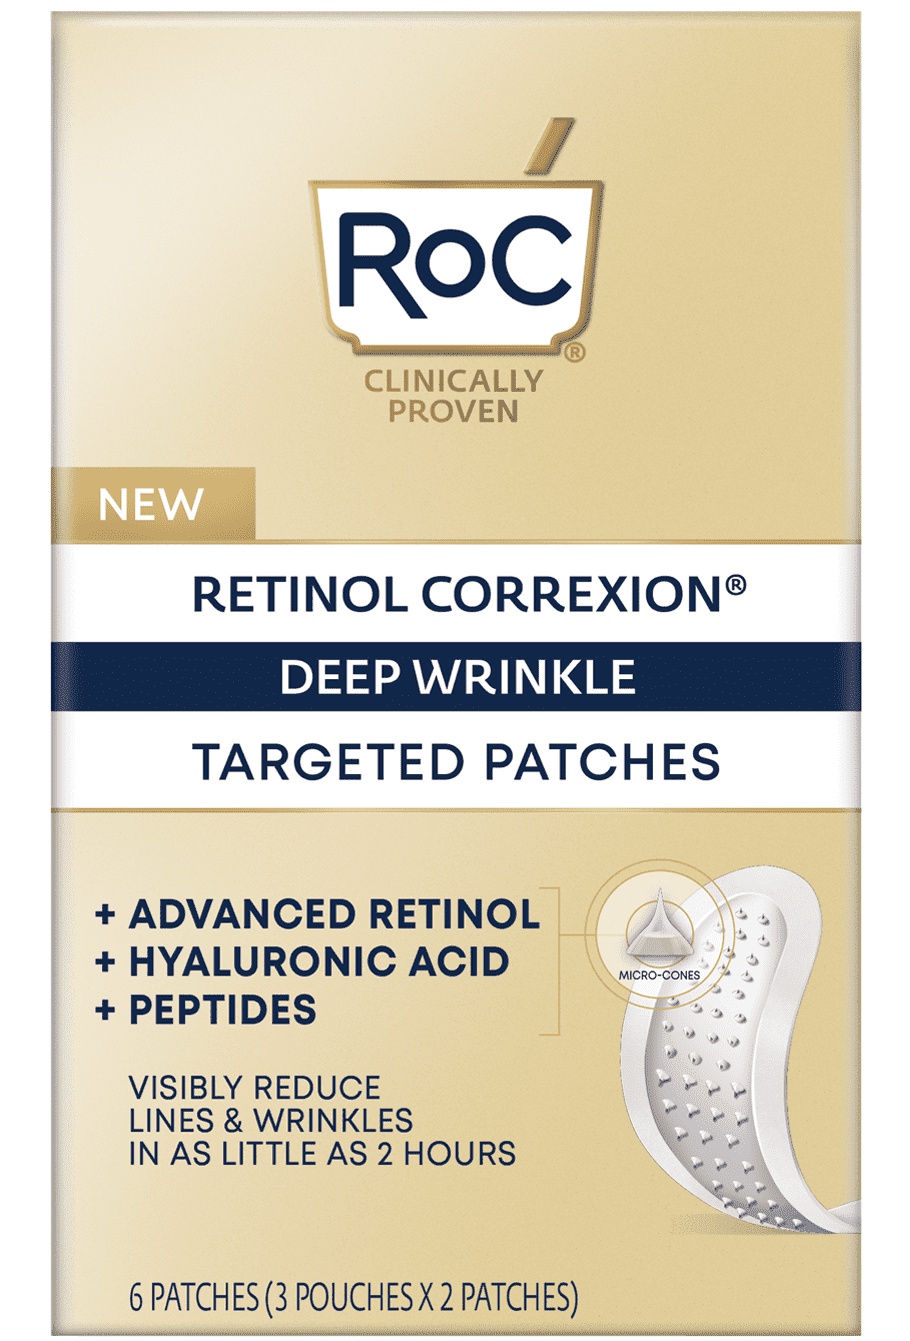 RoC Retinol Correxion Deep Wrinkle Targeted Patches